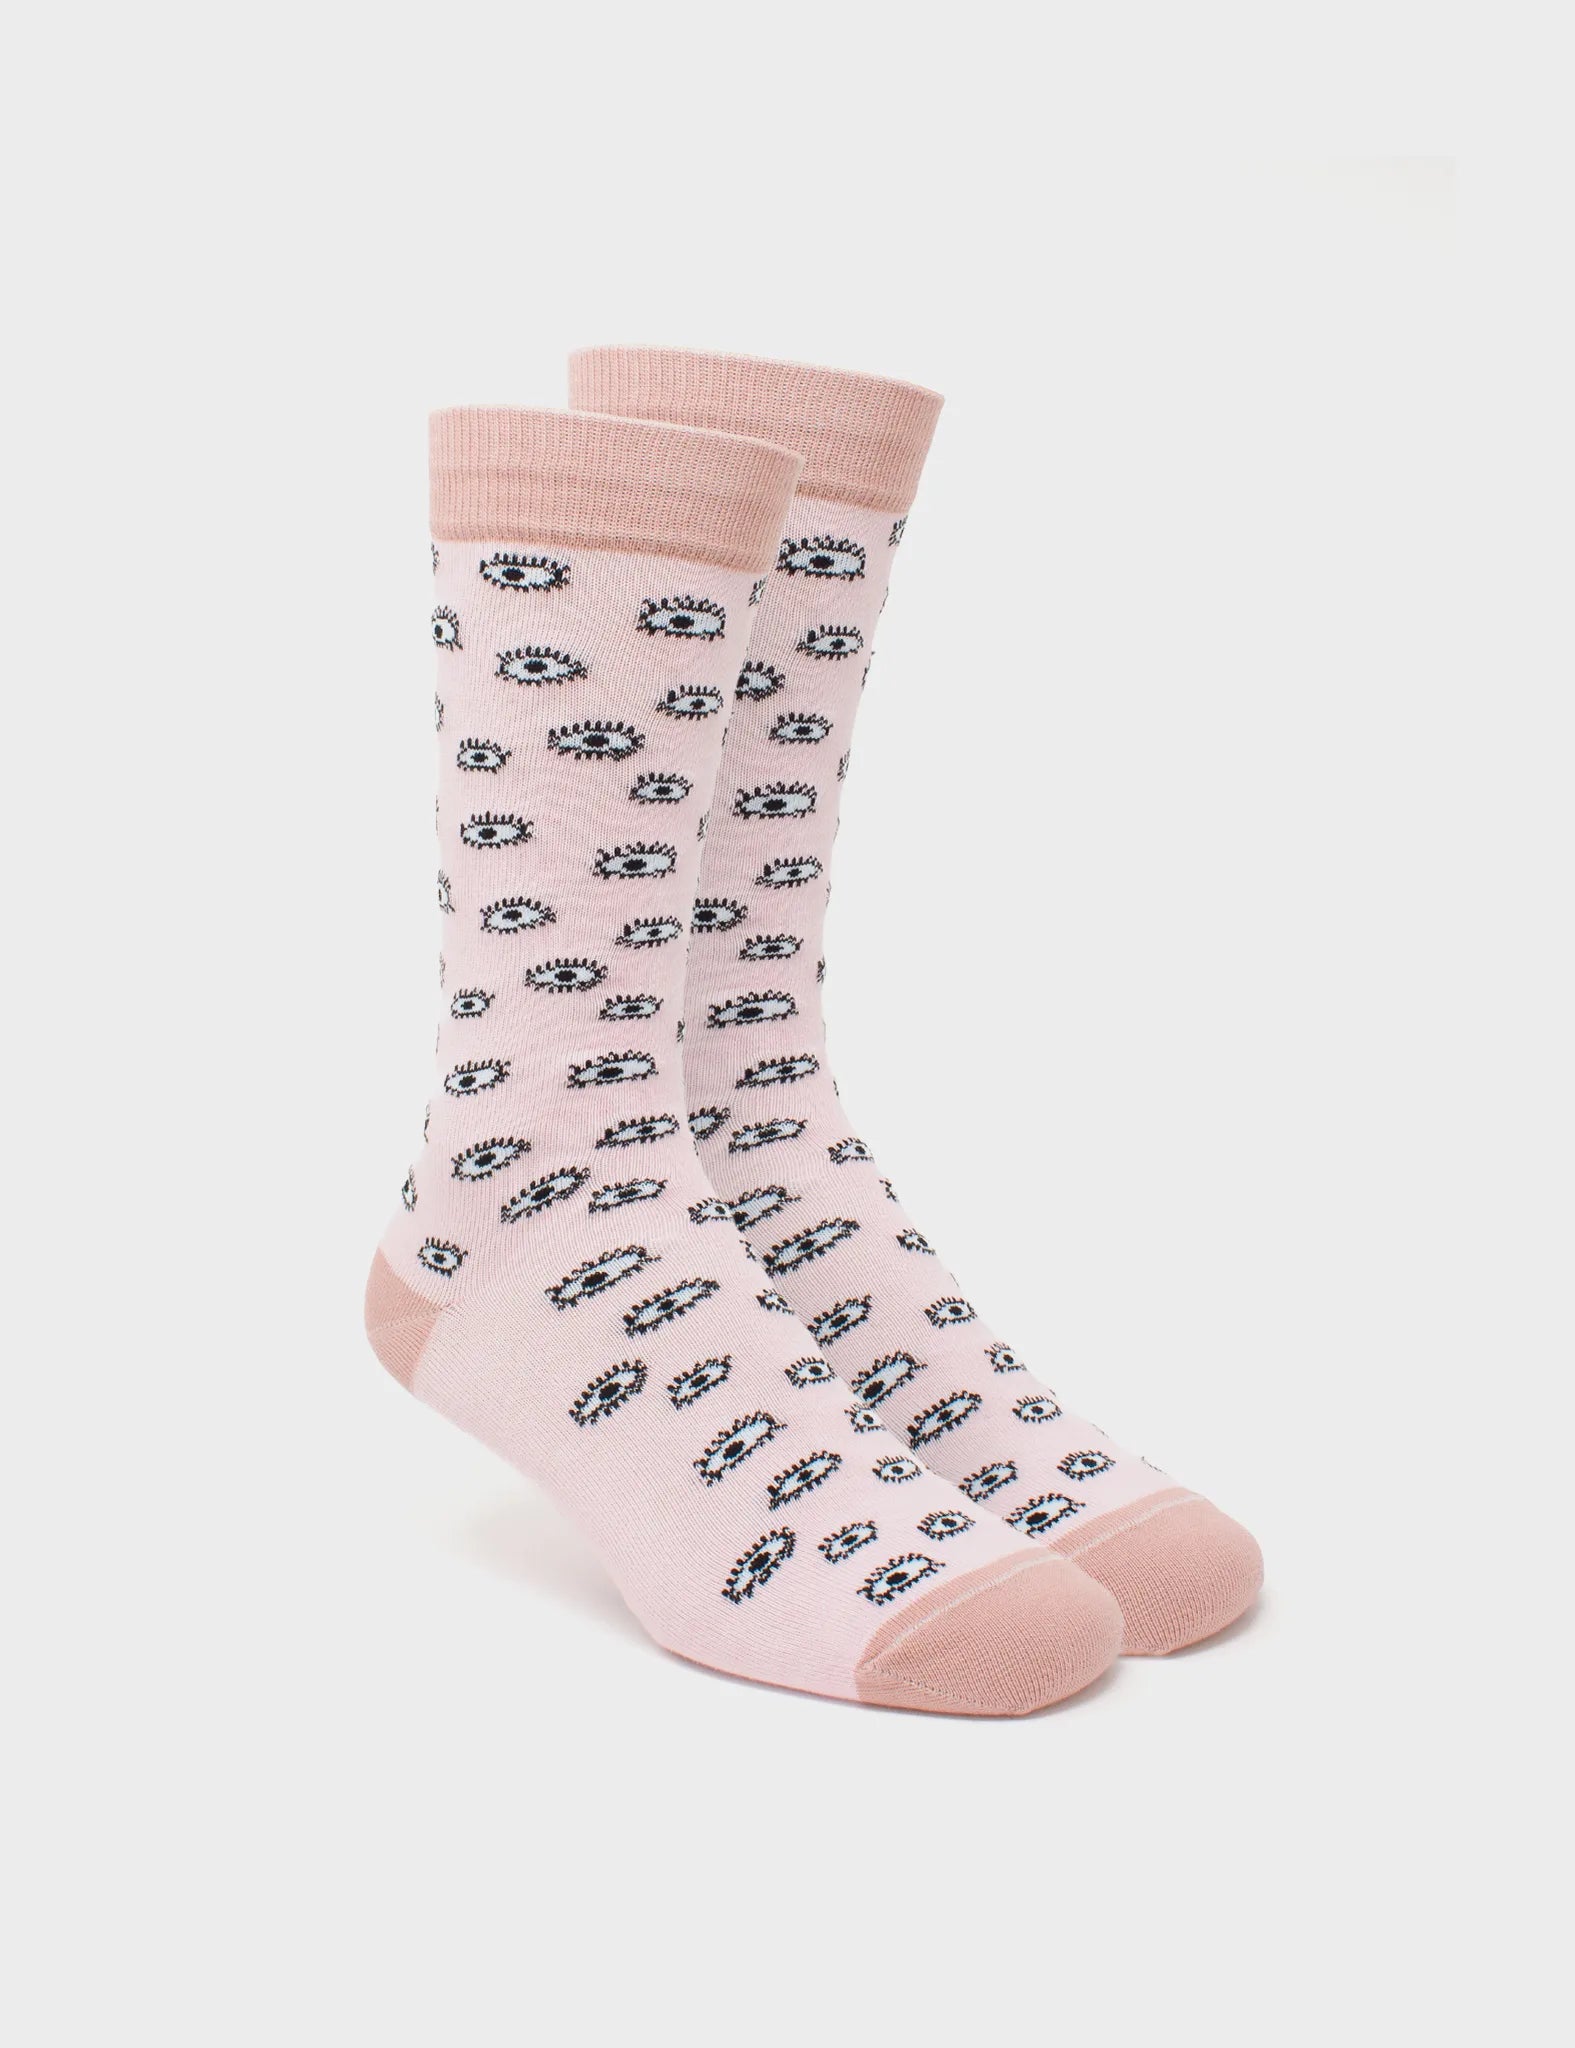 Pink and White Socks - All Over Eyes - Side view